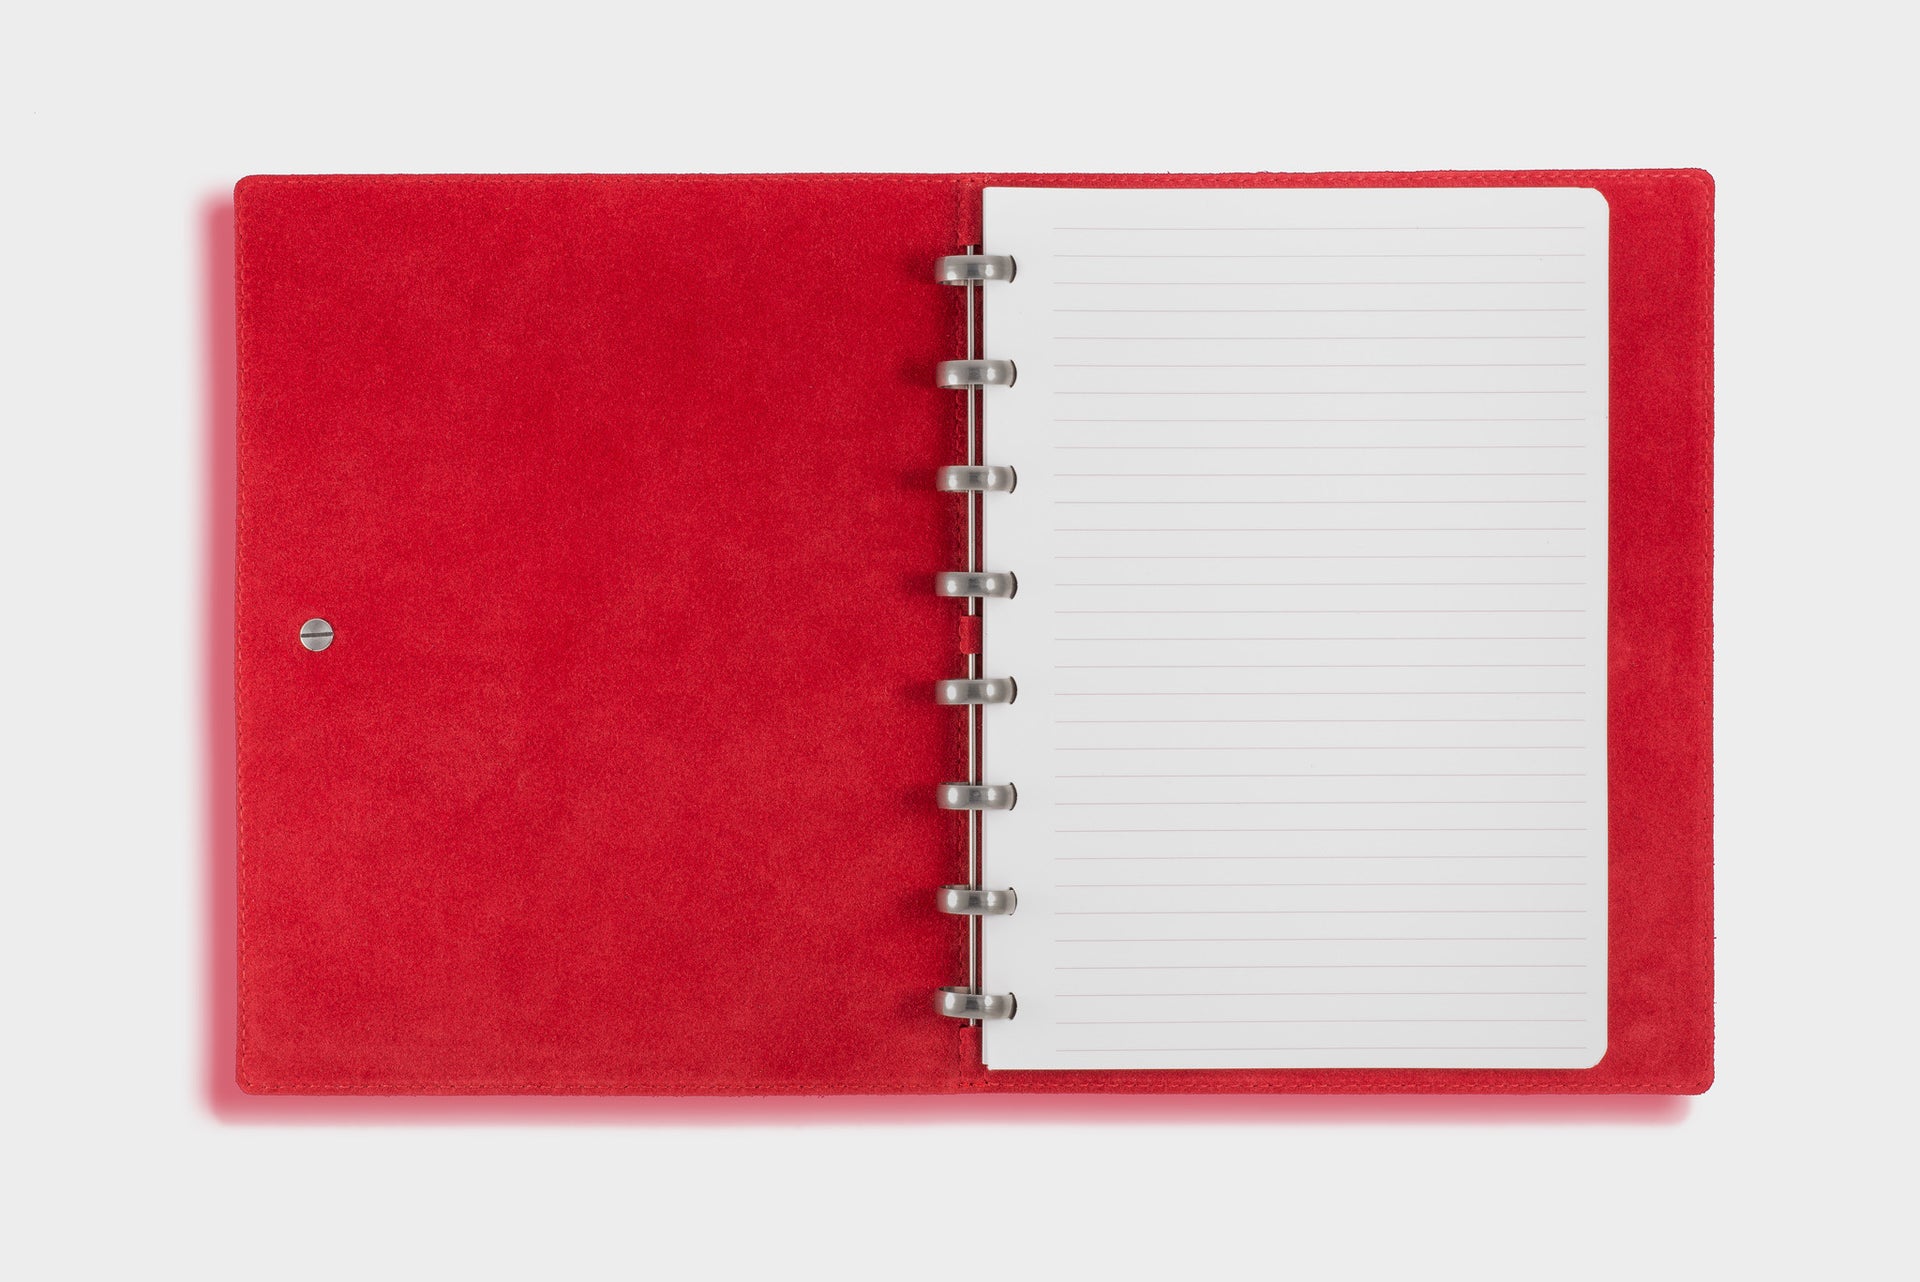 William Hannah Black leather and Red suede A5 notebook: inside